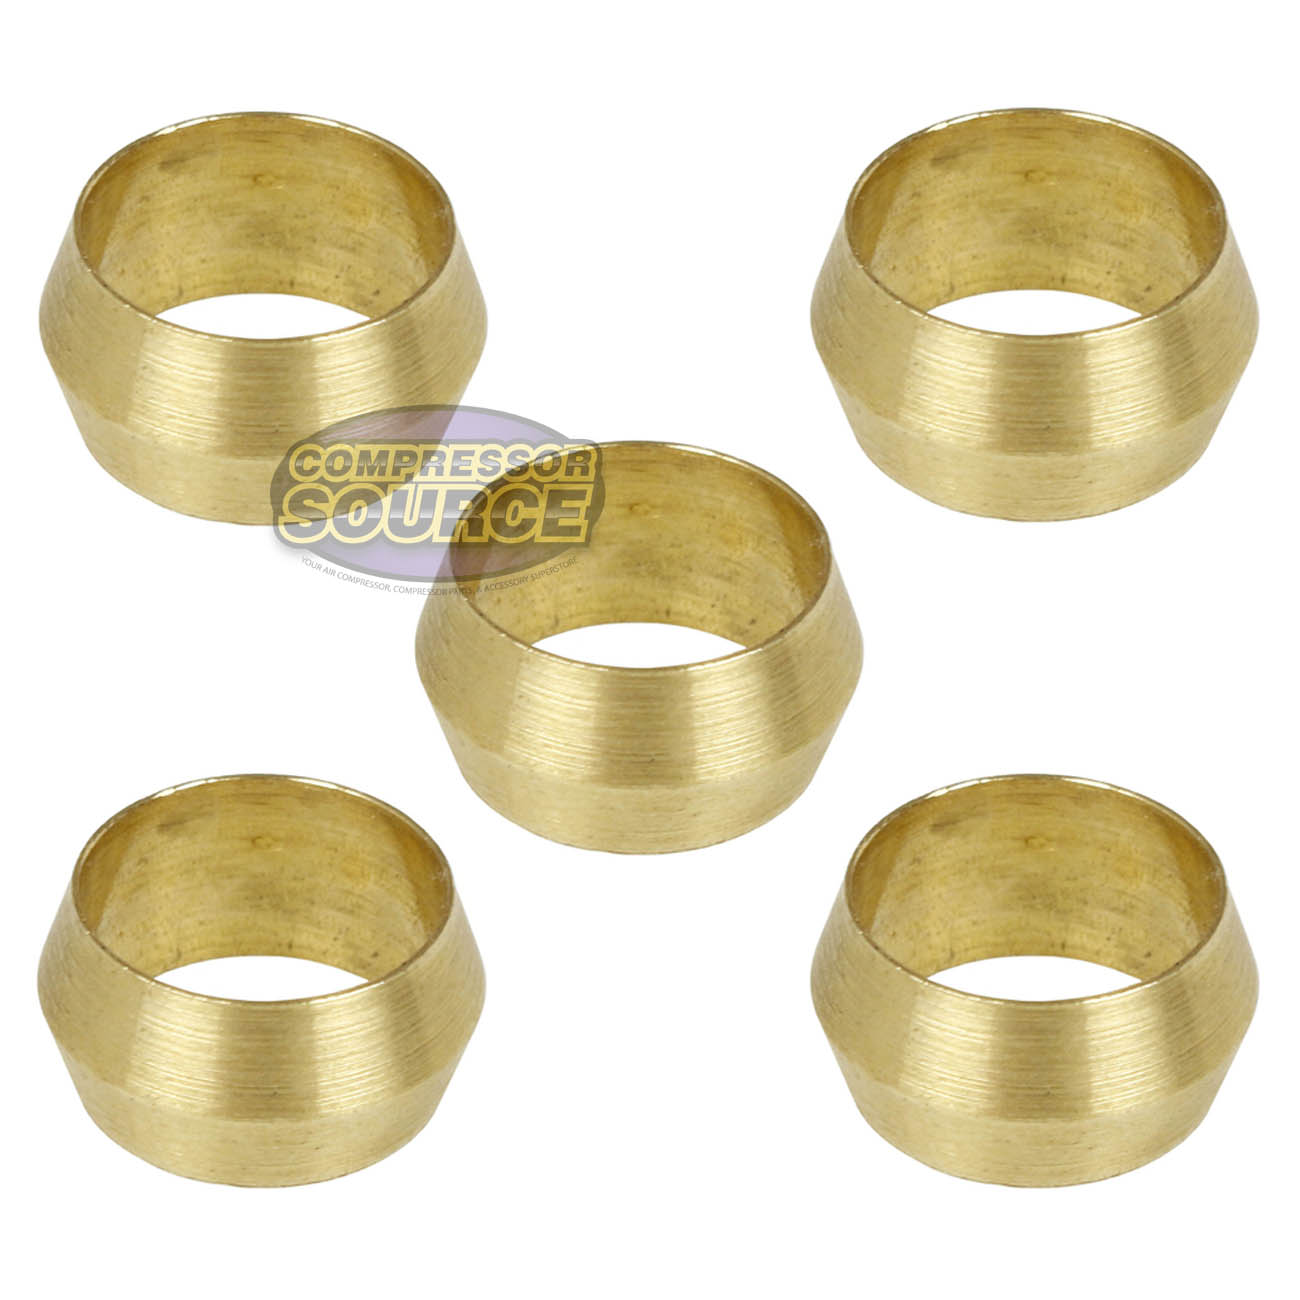 5 Pack 3/8" Compression Sleeve Solid Brass Ferrule for 3/8" Compression Tubing